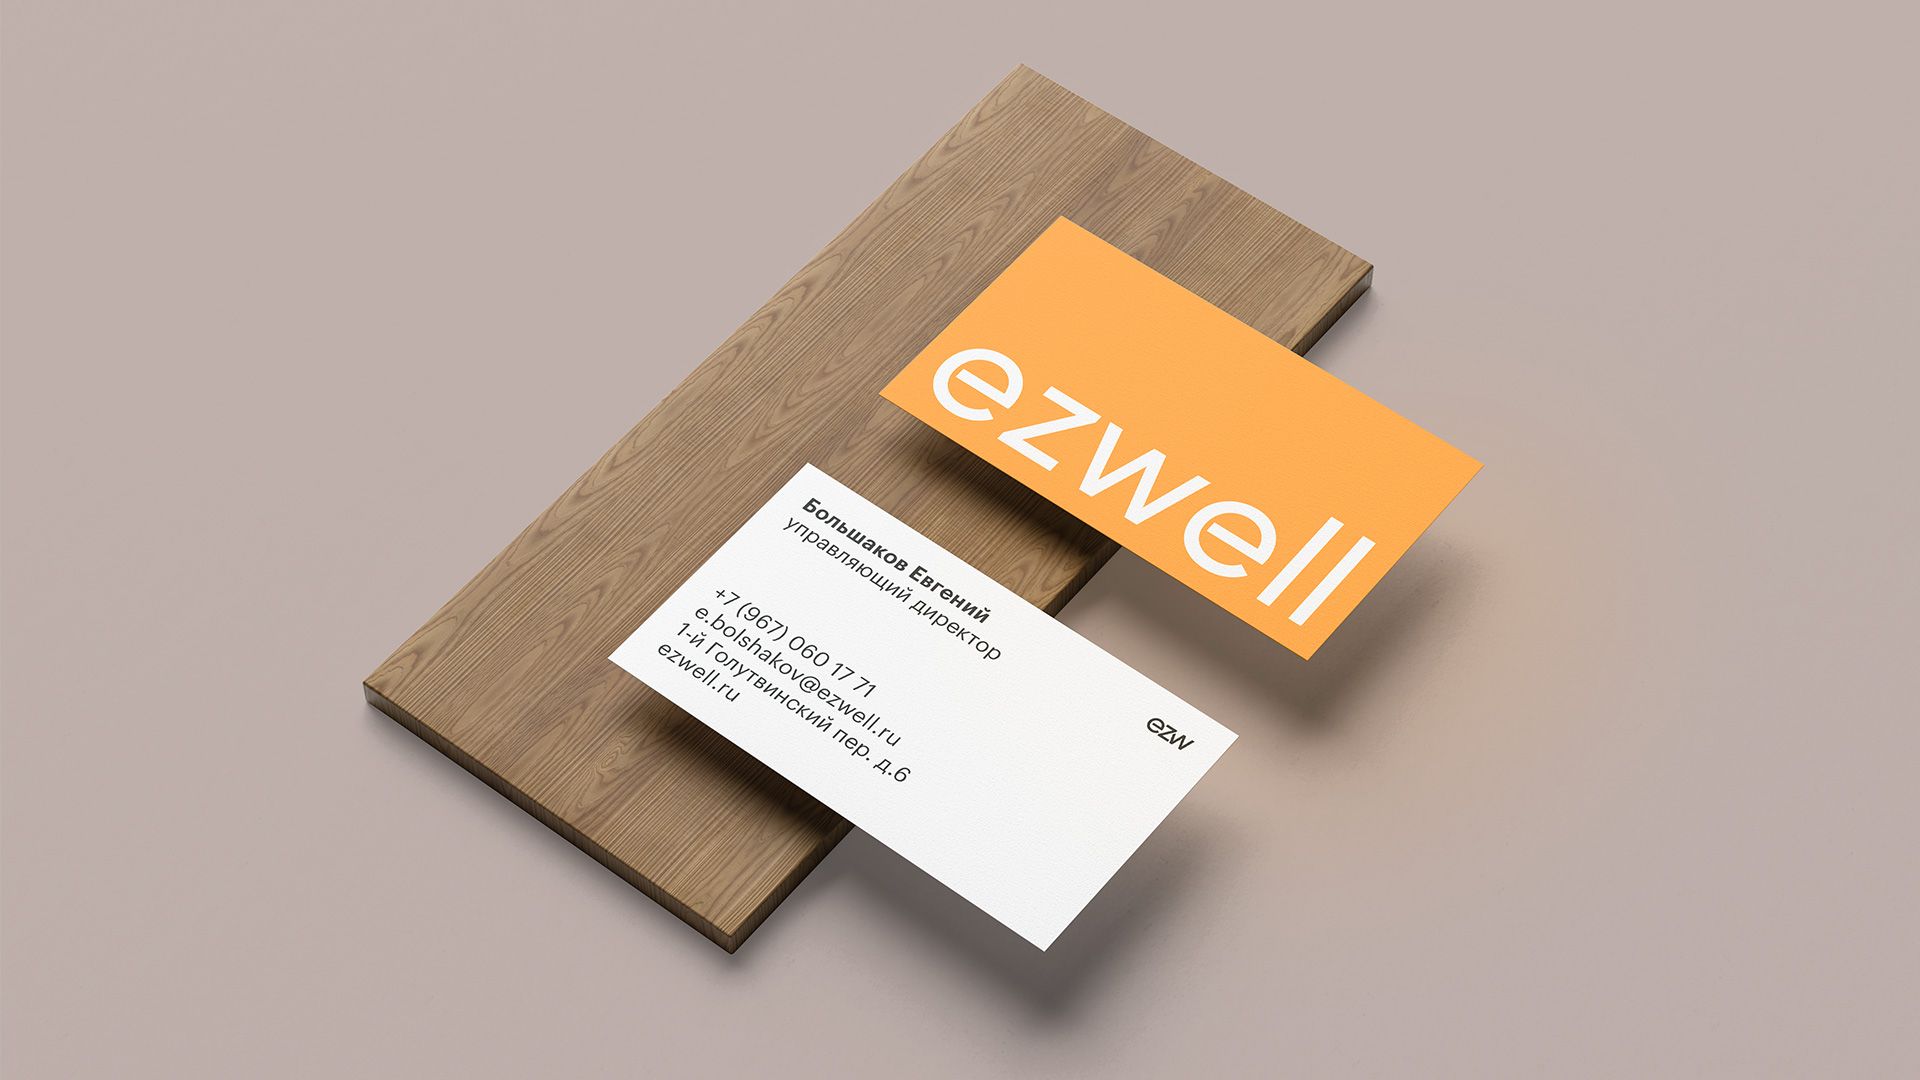 Ezwell